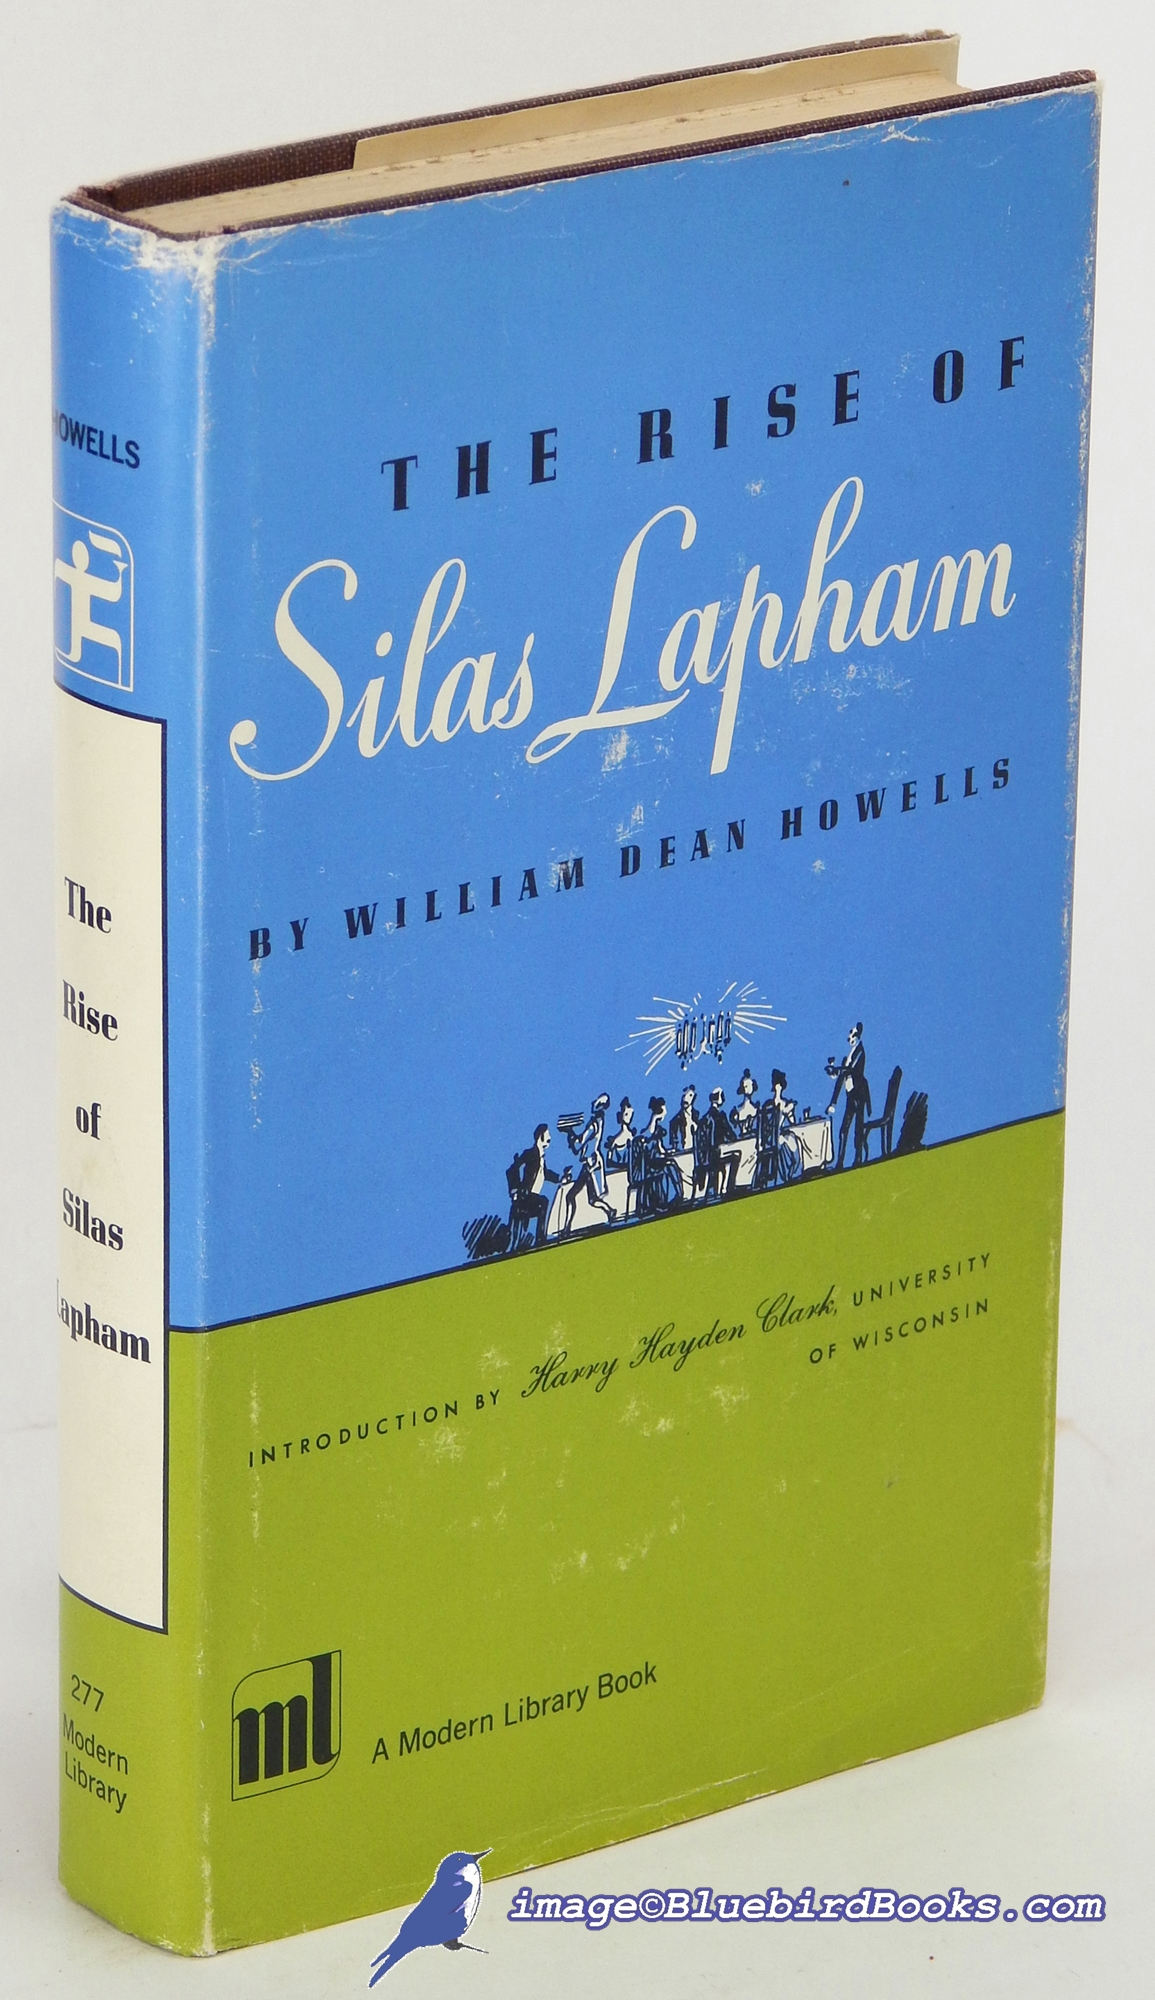 HOWELLS, WILLIAM DEAN - The Rise of Silas Lapham (Modern Library #277. 1)